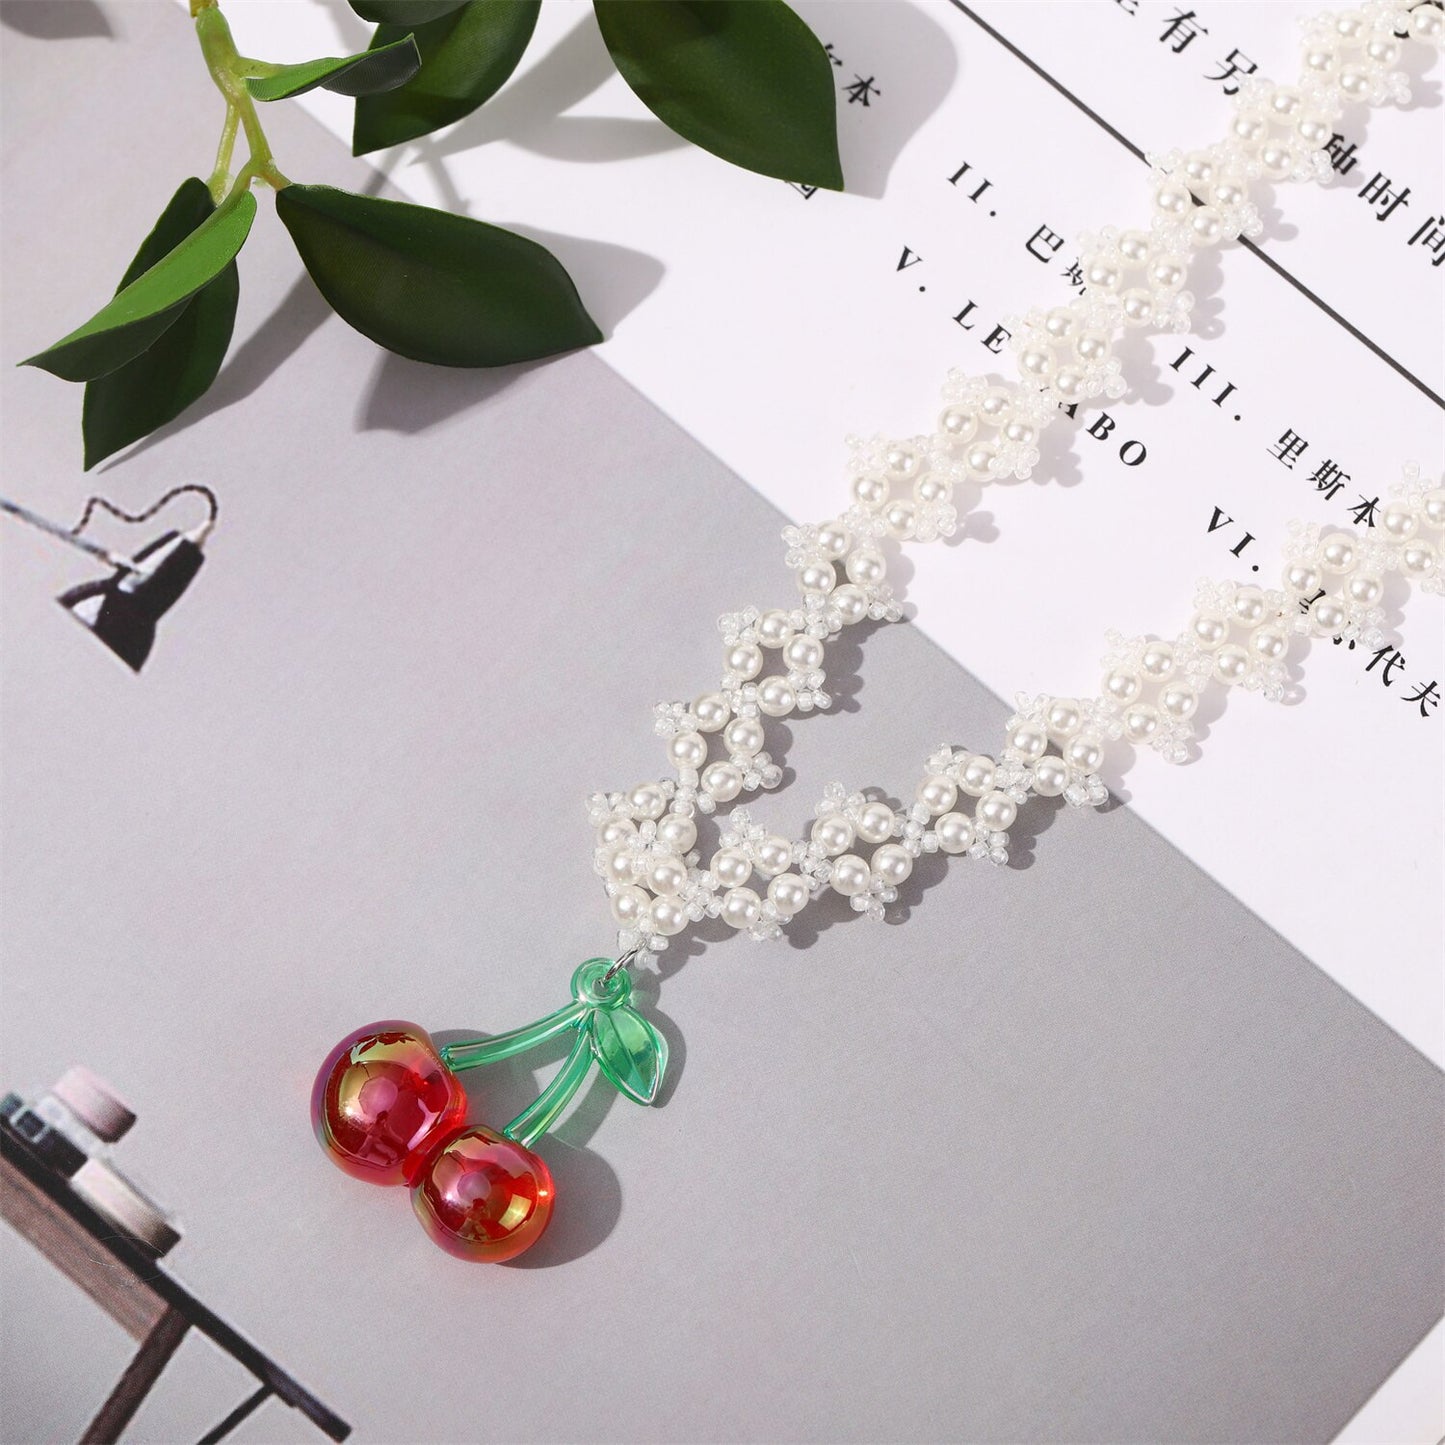 Fashion Red Cherry Strawberry Pendant Pearl Chain Women's Necklace Choker Charm Metal Sweater Chain Women Resin Jewelry Gift